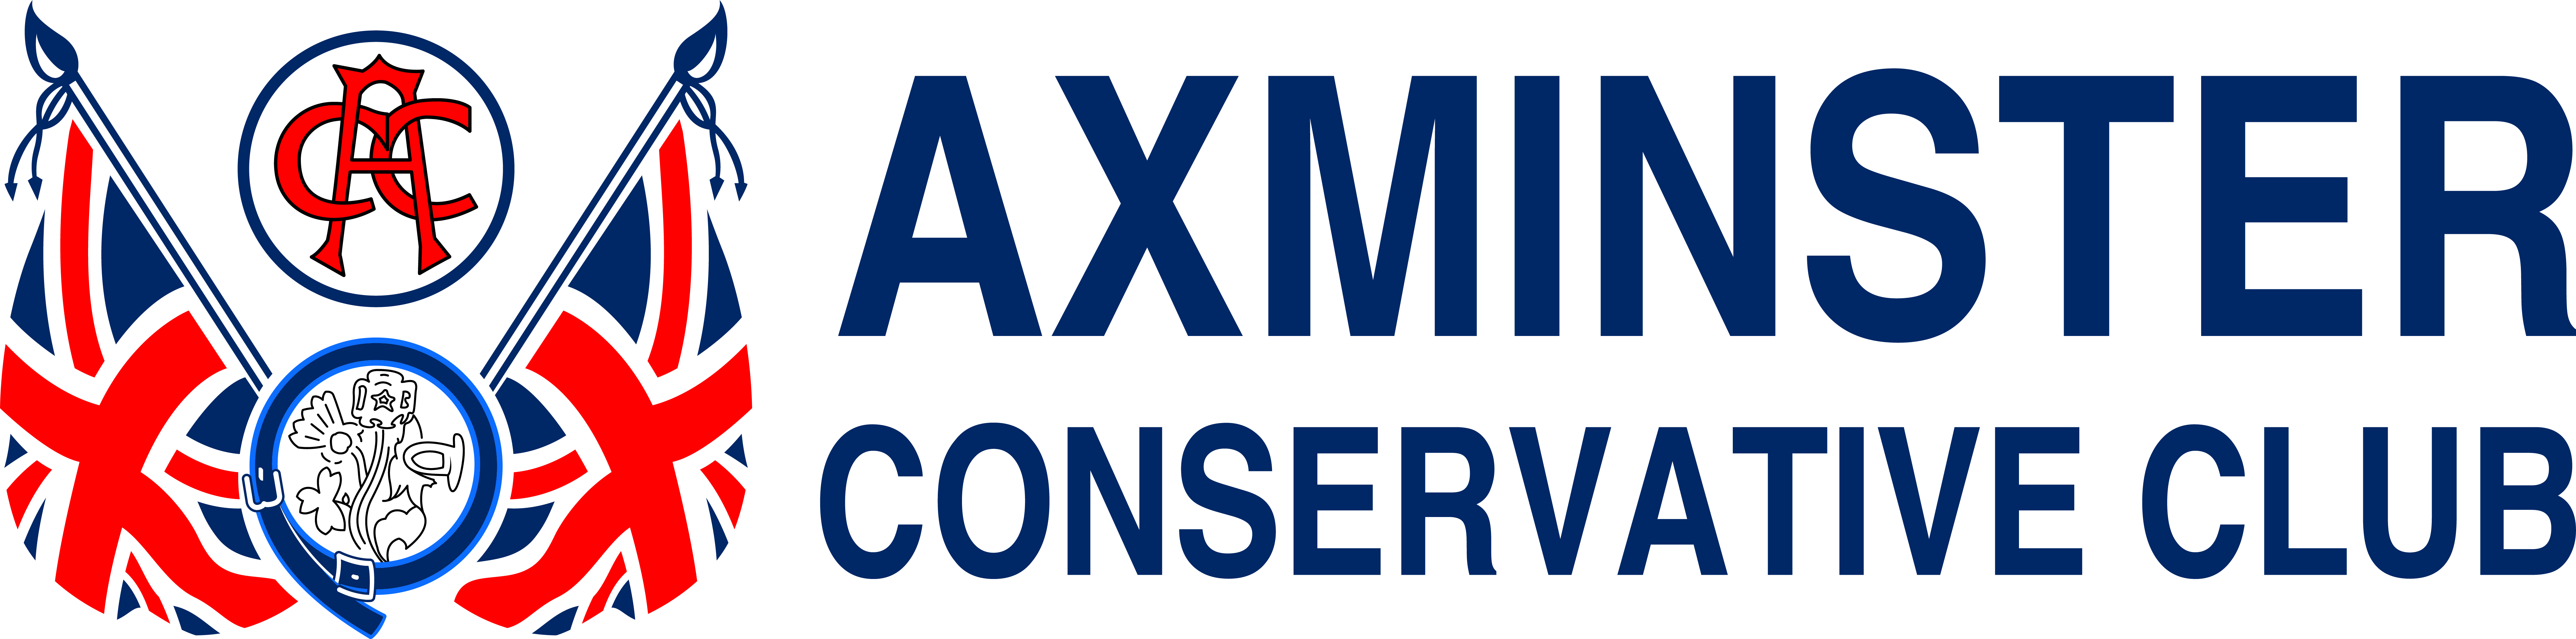 Axminster Conservative Club